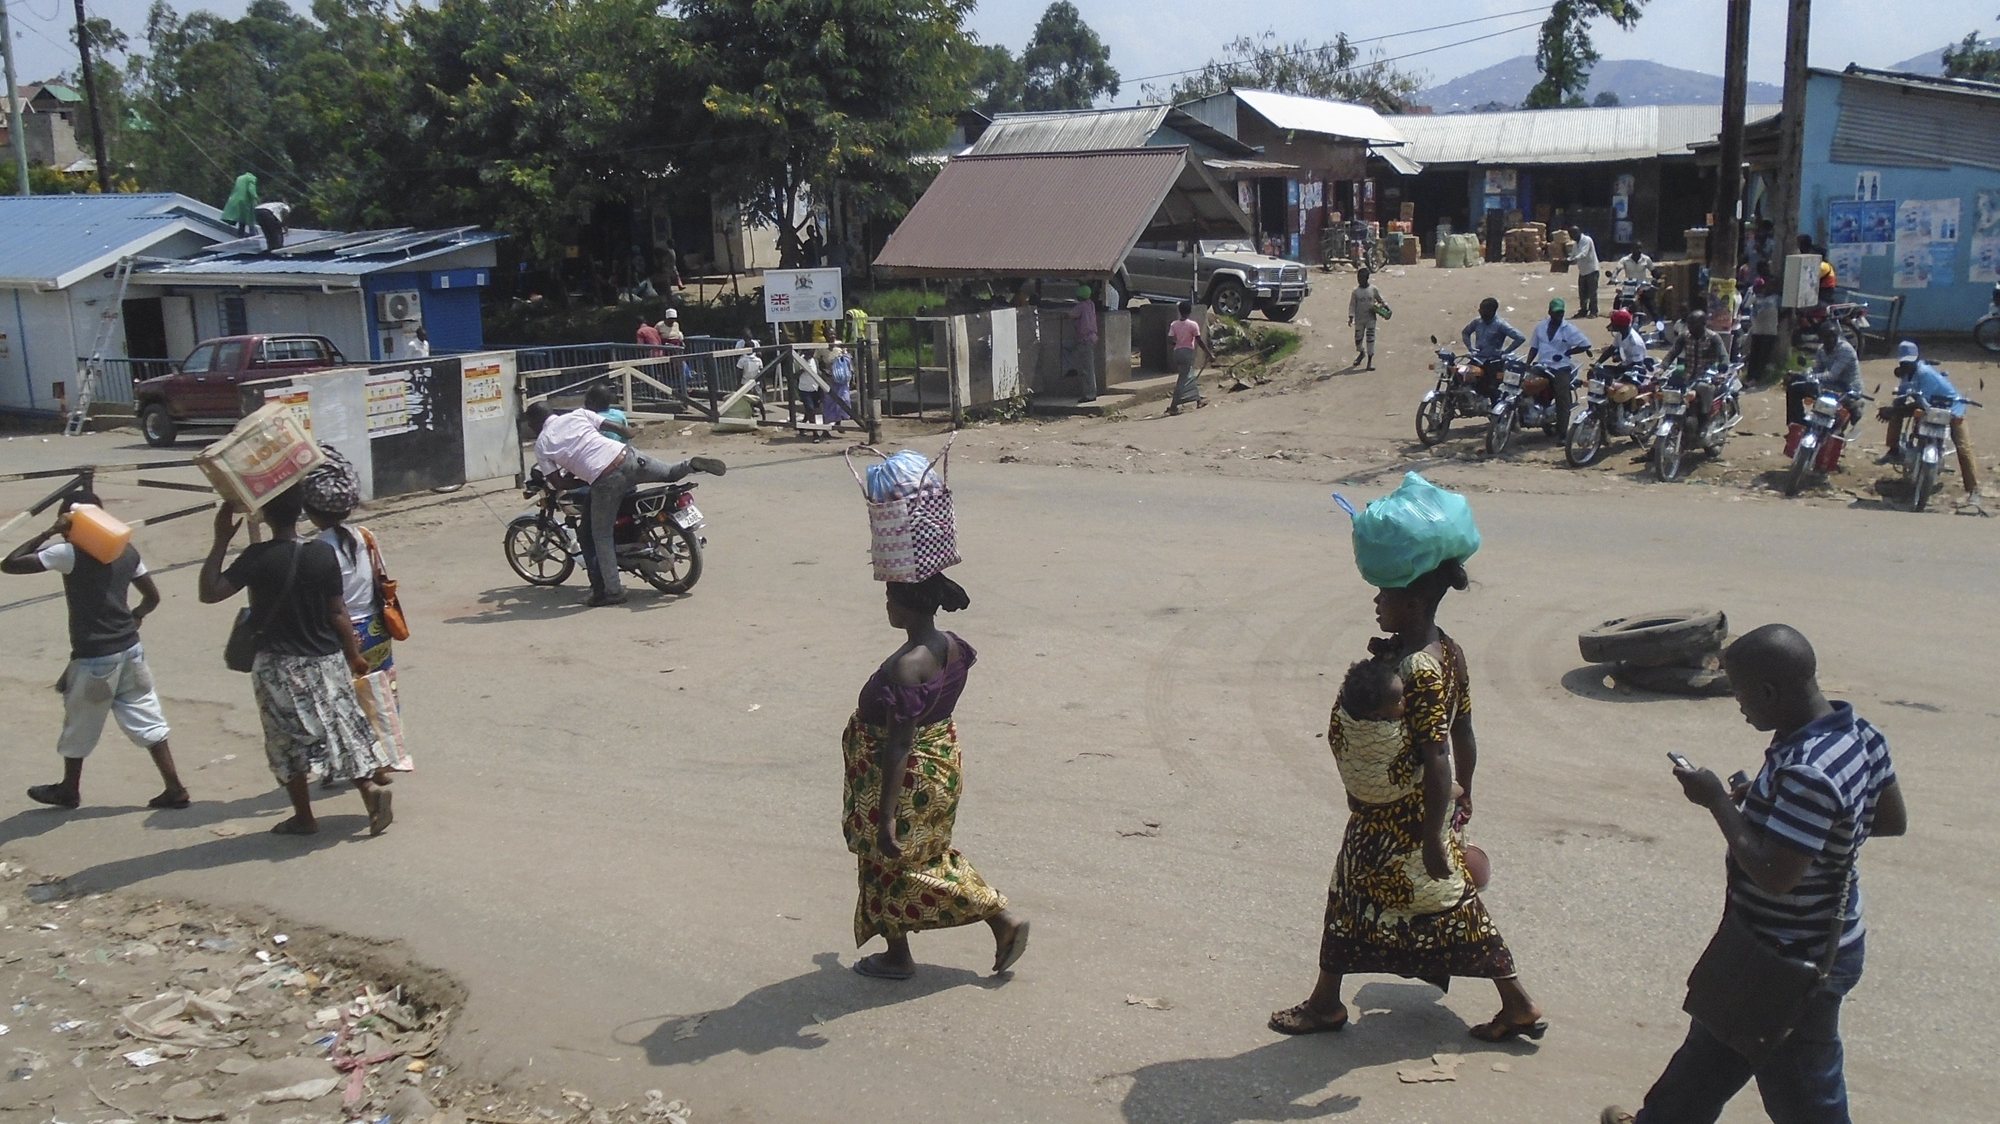 epa07648542 Women carry bags on their heads as they walk the street of Mpondwe, where the Uganda Red Cross set up a check point to screen people crossing borders into Uganda from Democratic Republic of the Congo, in the border town of Mpondwe in western Uganda, 14 June 2019. World Health Organization (WHO) is considering declaring Ebola an &#039;international emergency&#039; after two died in Uganda as the virus is spread from DR Congo to Uganda.  EPA/ENID NINSIIMA